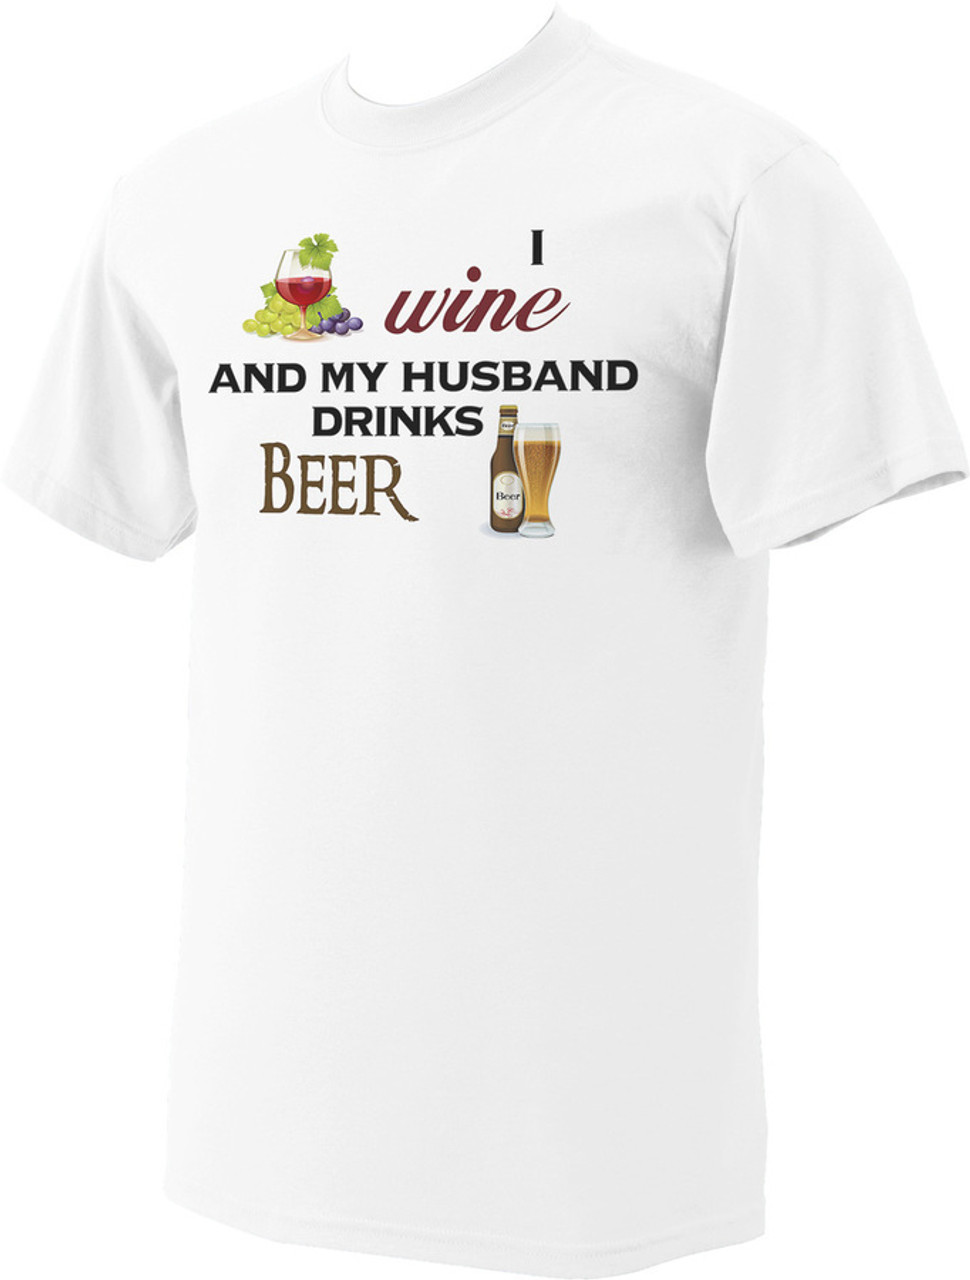 I Wine and My Husband Drinks Beer T-Shirt